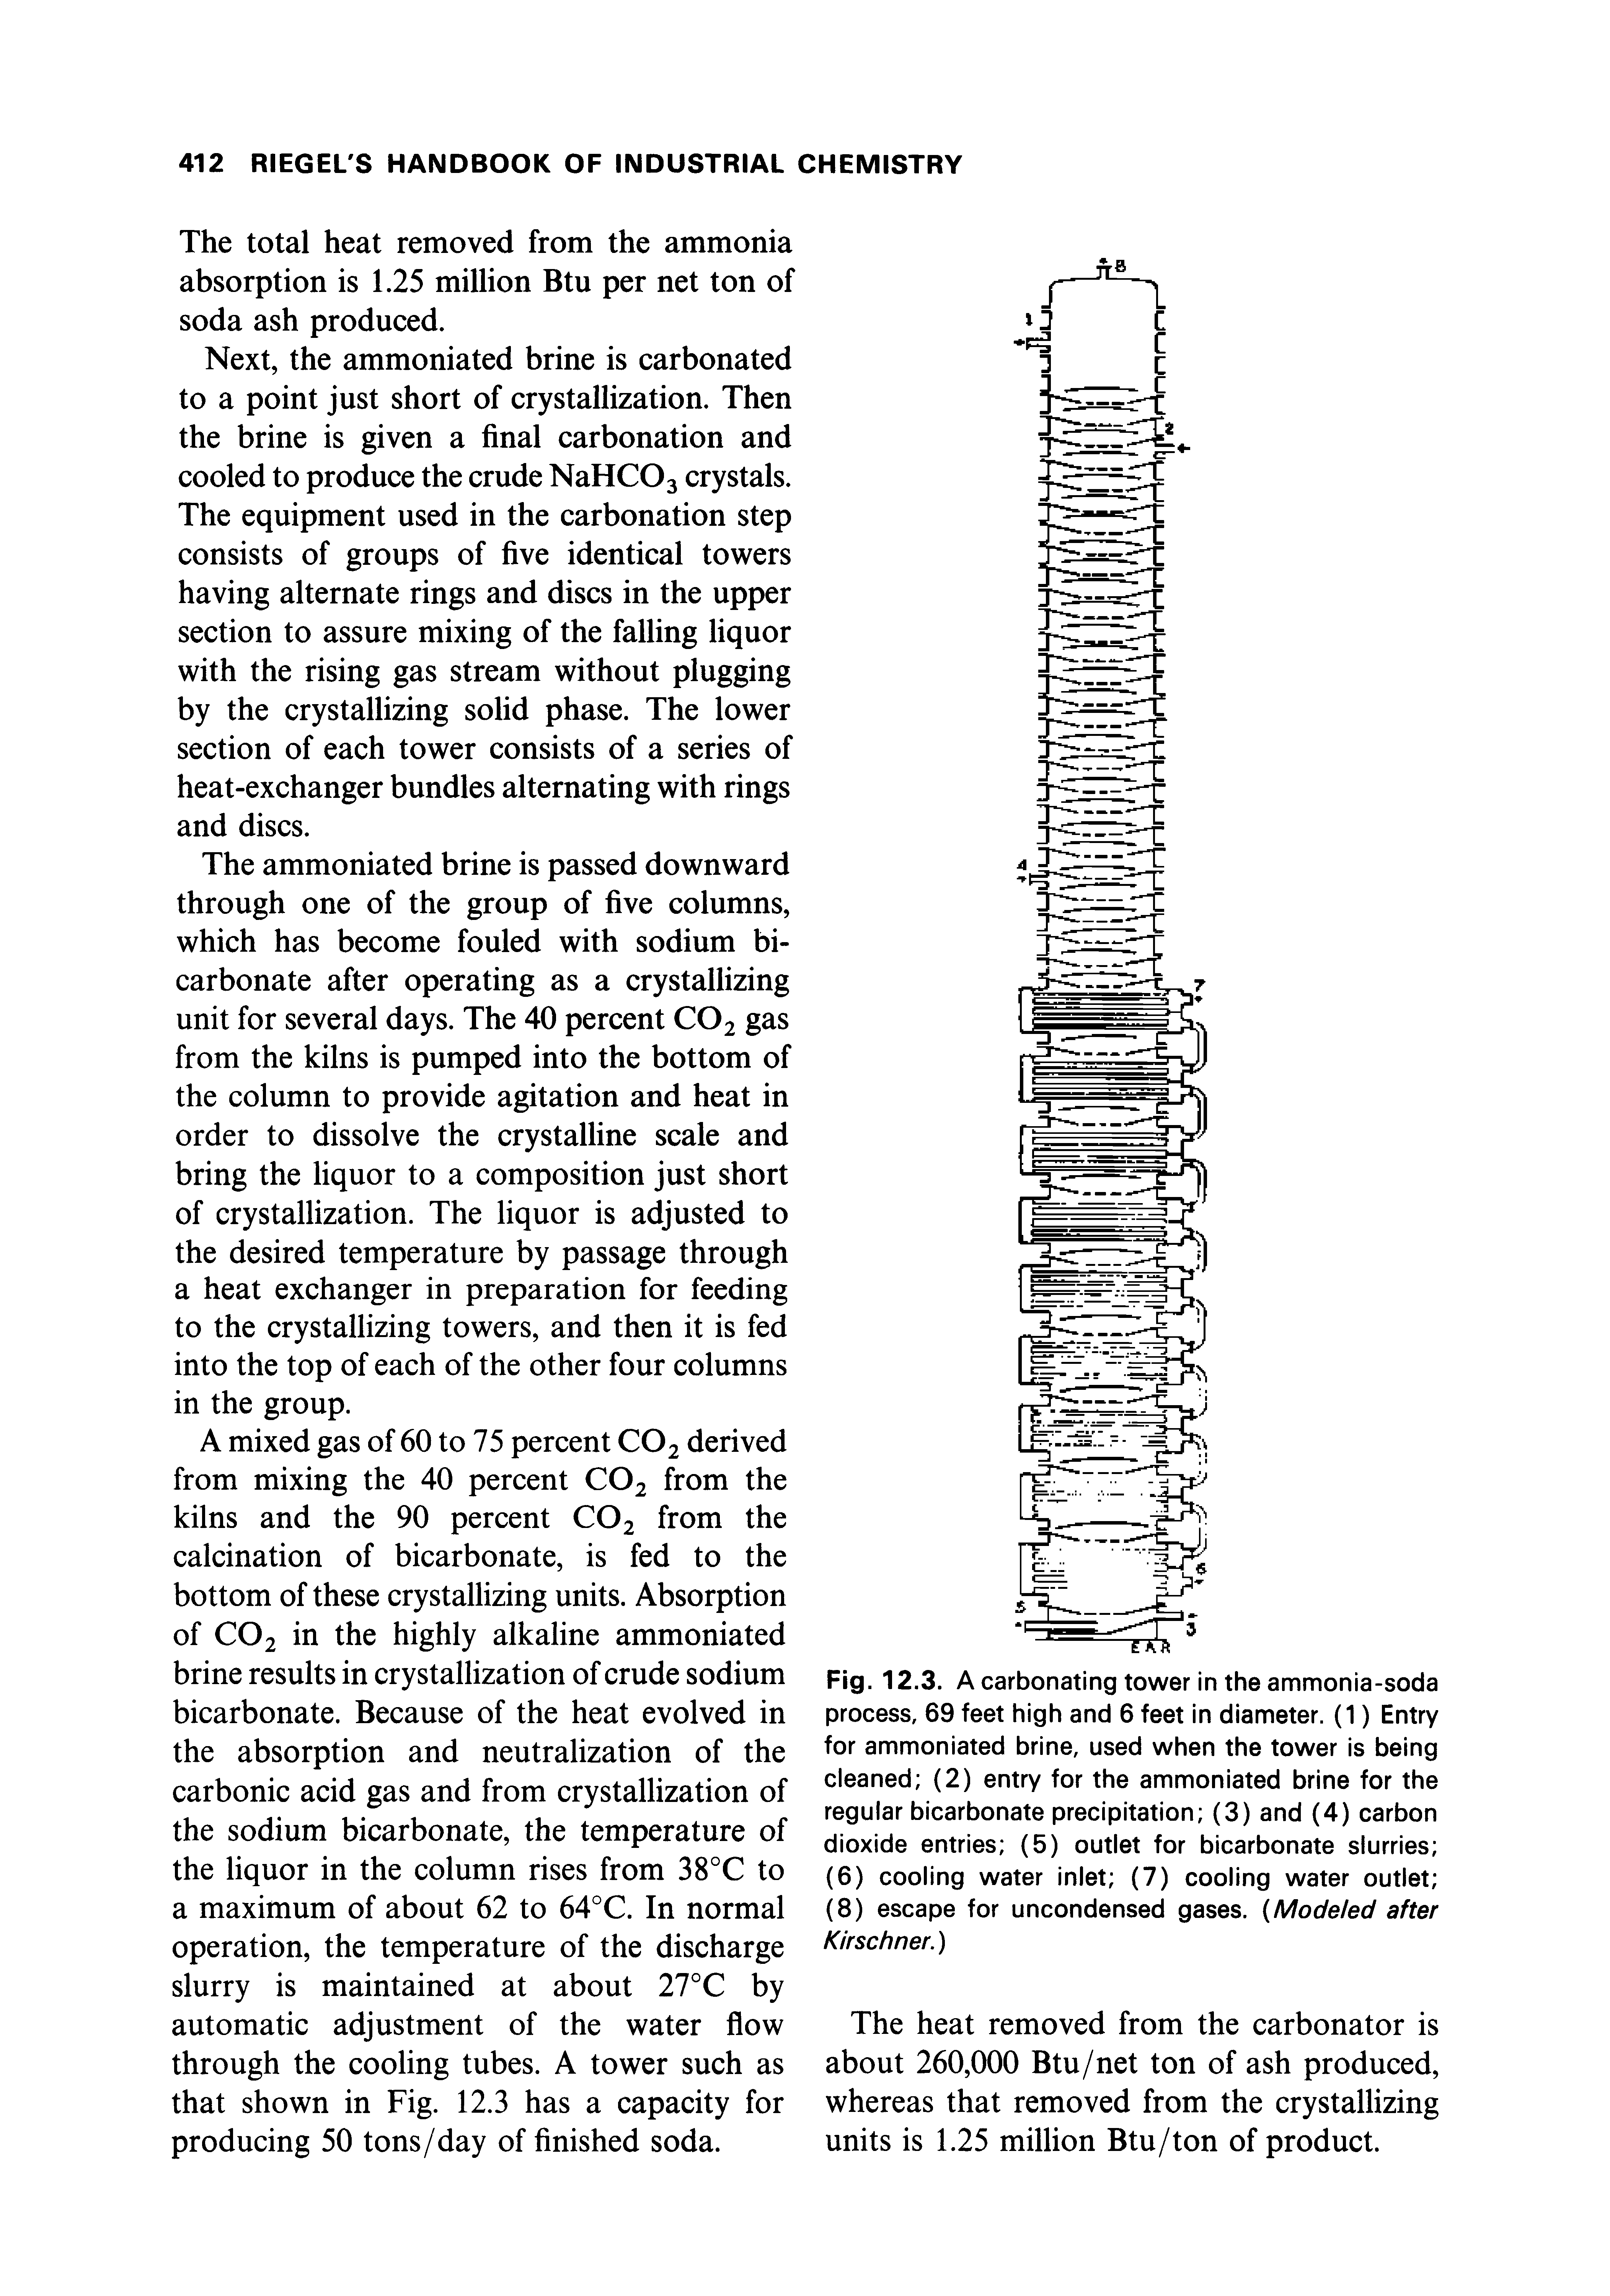 Fig. 12.3. A carbonating tower in the ammonia-soda process, 69 feet high and 6 feet in diameter. (1) Entry for ammoniated brine, used when the tower is being cleaned (2) entry for the ammoniated brine for the regular bicarbonate precipitation (3) and (4) carbon dioxide entries (5) outlet for bicarbonate slurries (6) cooling water inlet (7) cooling water outlet (8) escape for uncondensed gases. (Modeled after Kirschner.)...